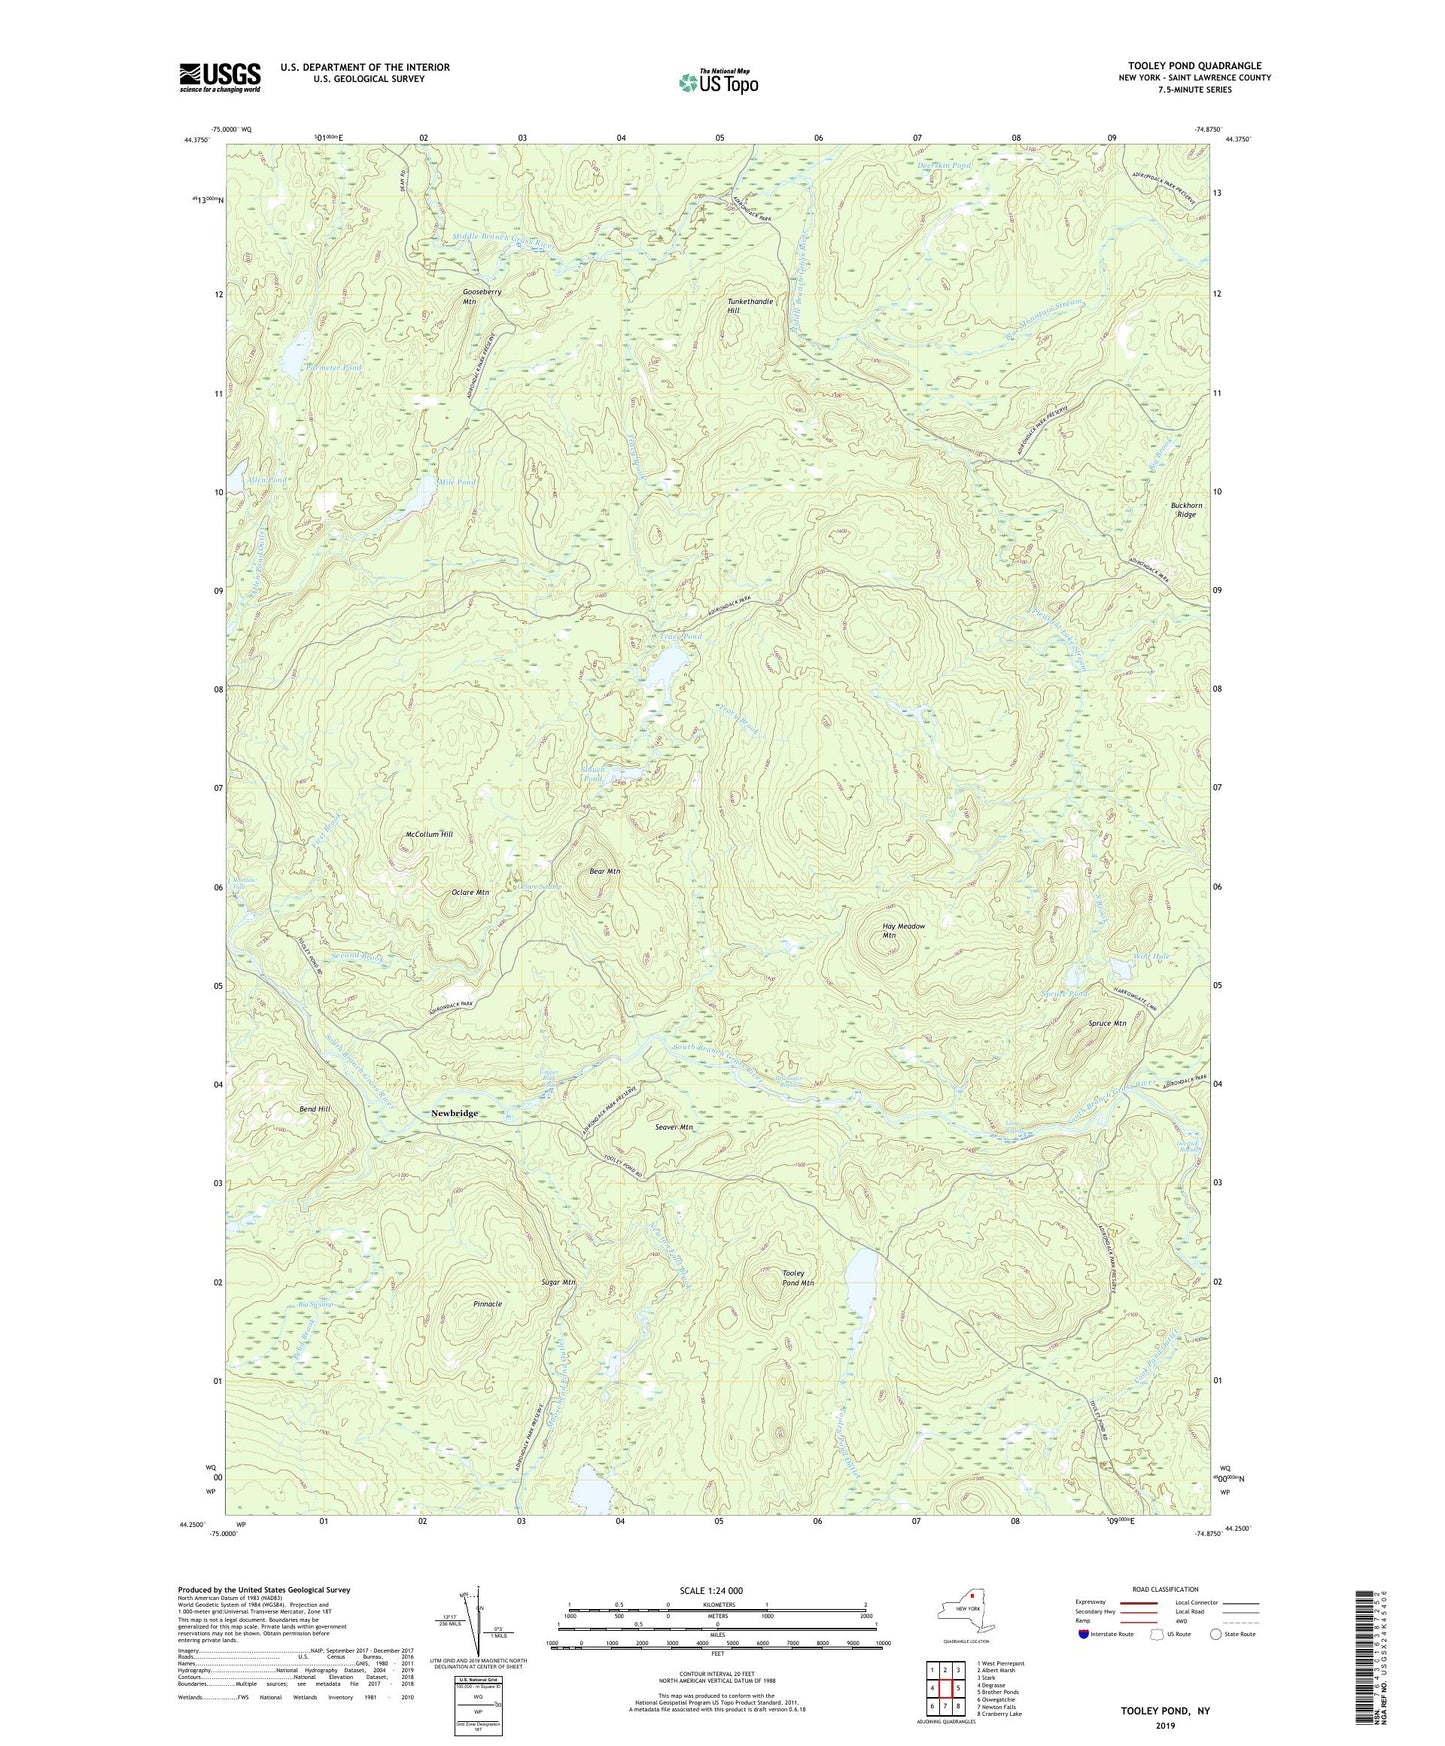 Tooley Pond New York US Topo Map Image